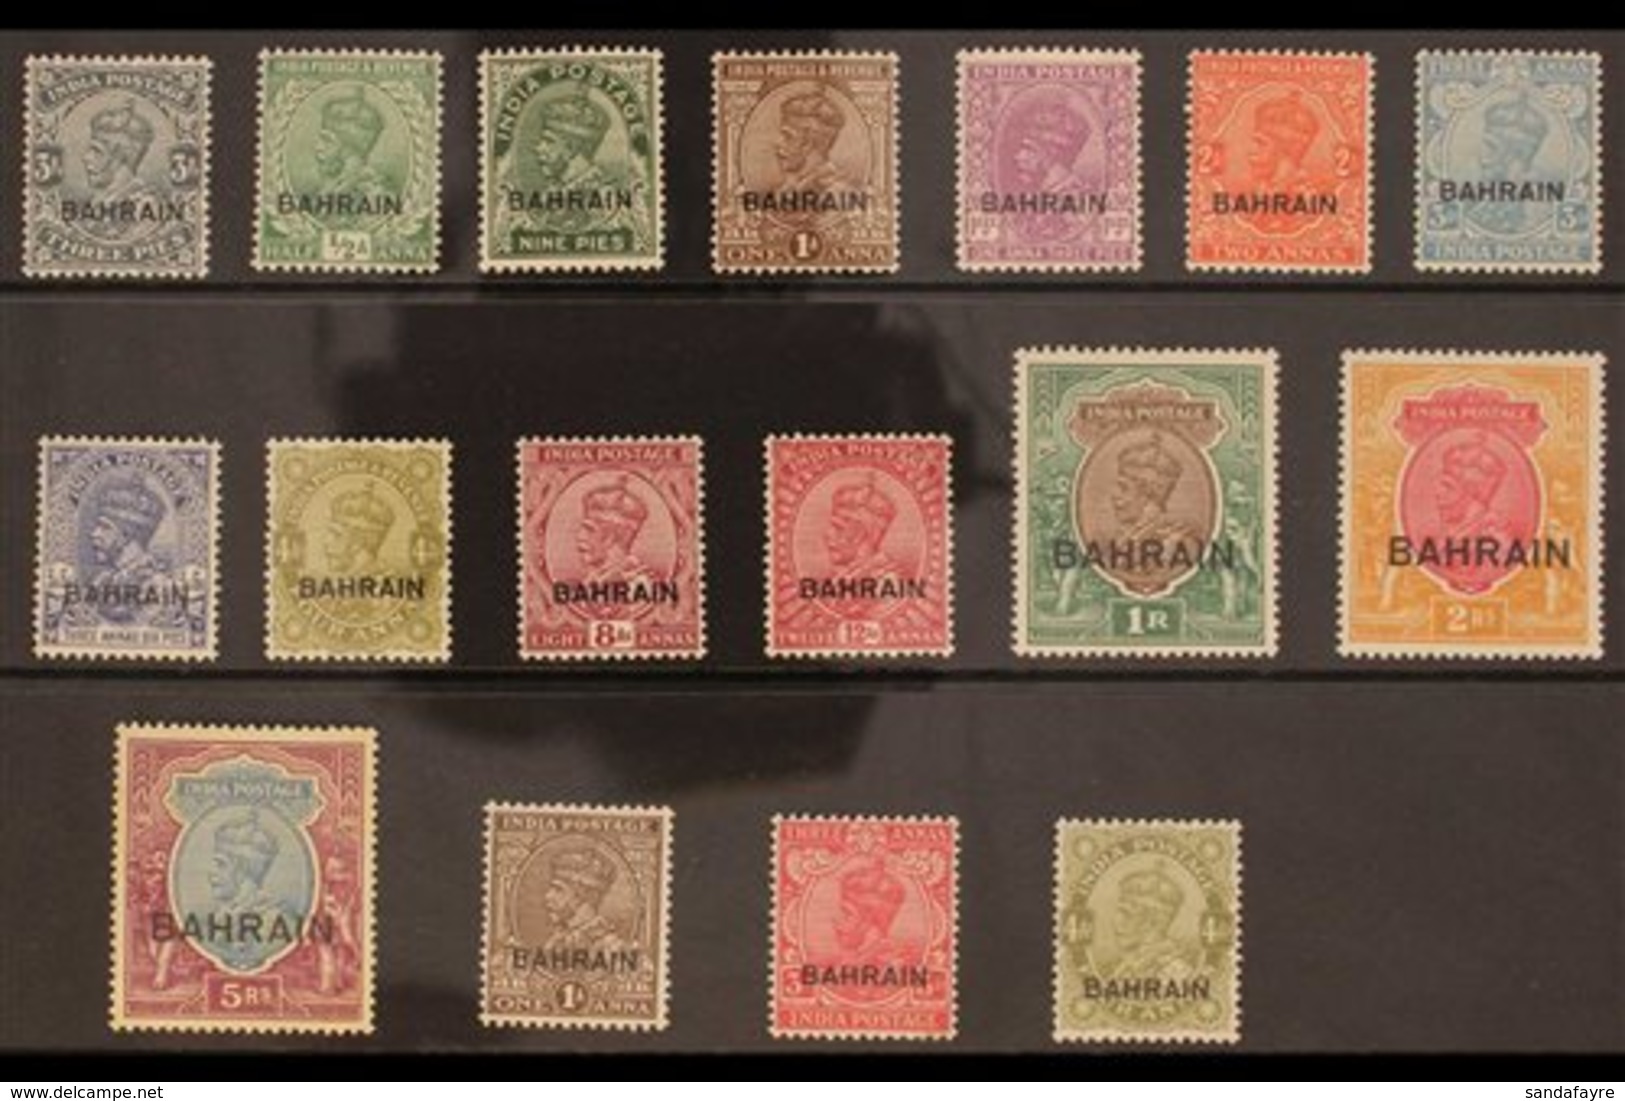 1933-1937  KGV 1933-37 Complete Set (SG 1/14), Plus 1934-37 1a, 3a And 4a (SG 16, 18 & 19), Very Fine Mint. (17 Stamps)  - Bahrain (...-1965)